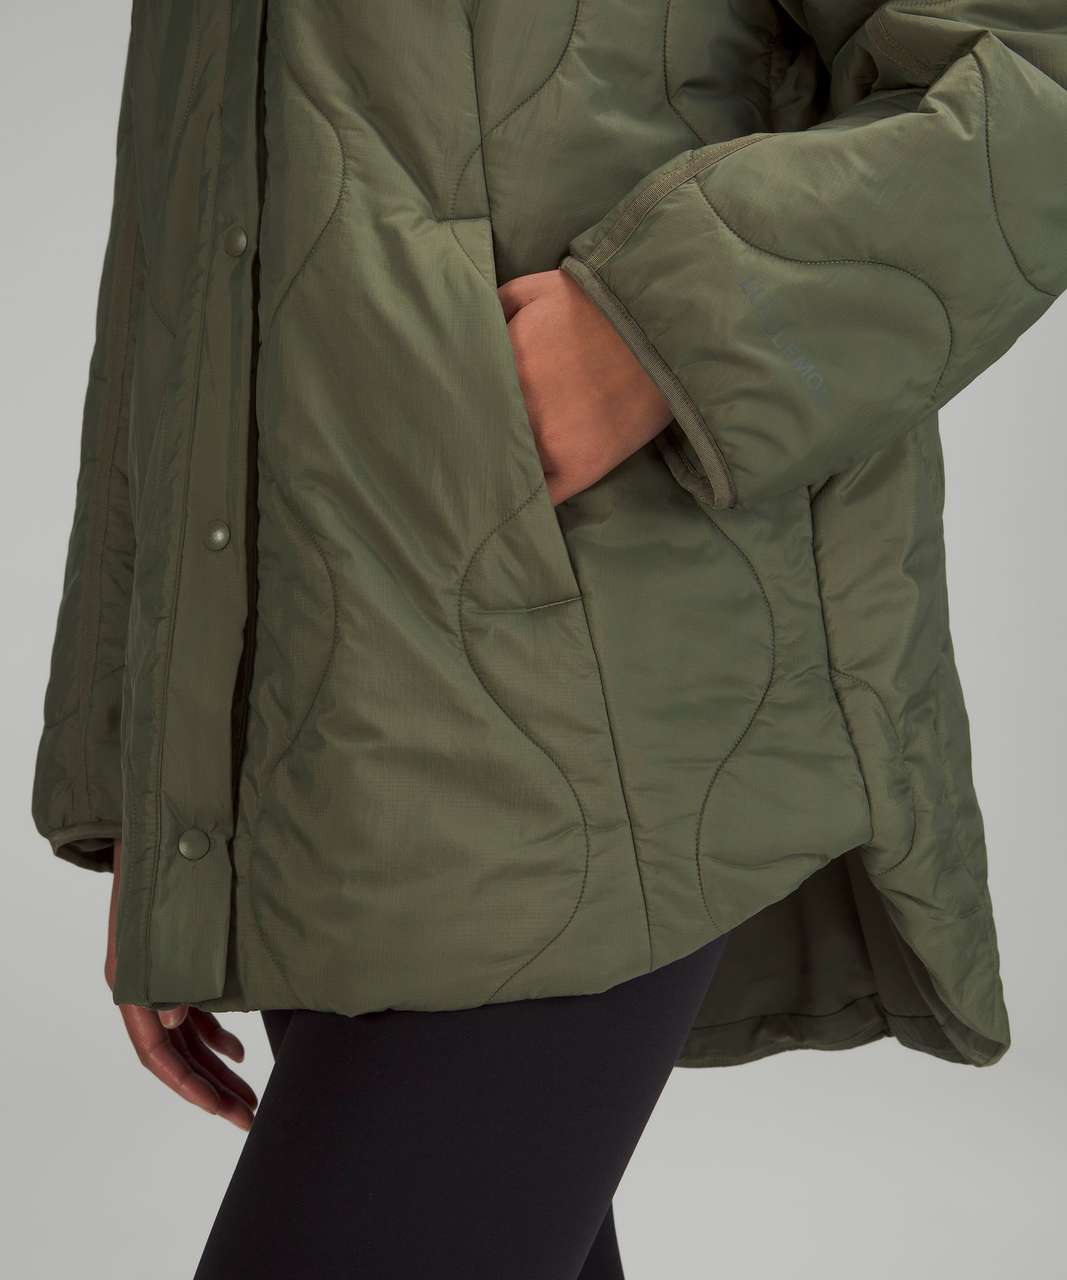 NWT lululemon quilted calm jacket~SIZE:6,8,10,12~BLACK&Army Green